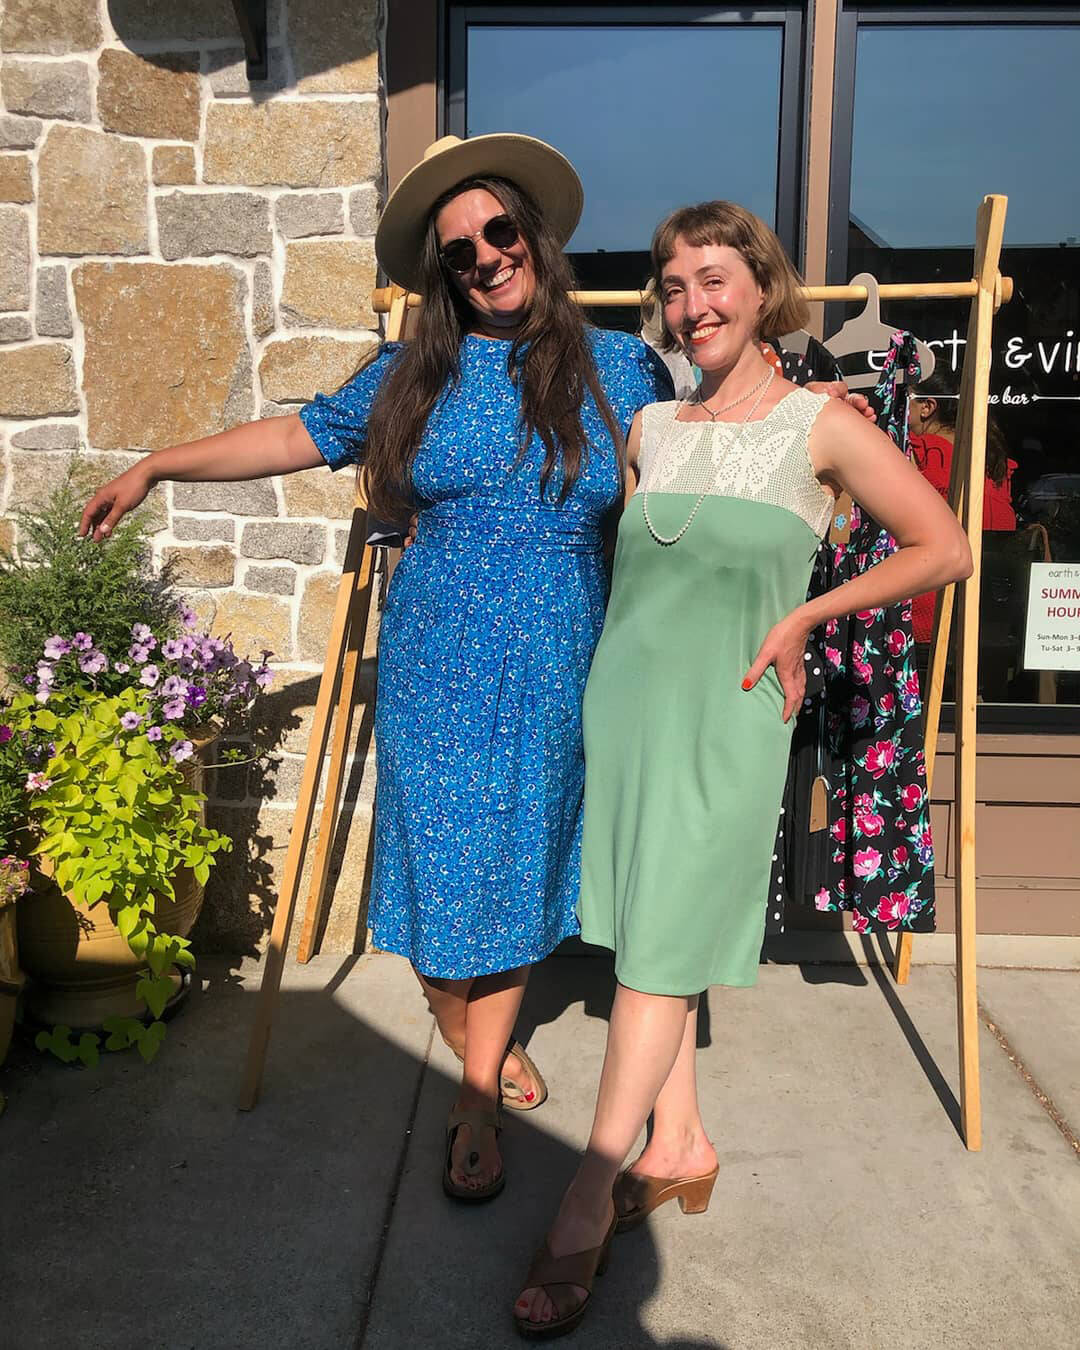 Bijou is a pop-up vintage shop on Bainbridge Island, where working women can find quality dresses, suits, pants and blouses.